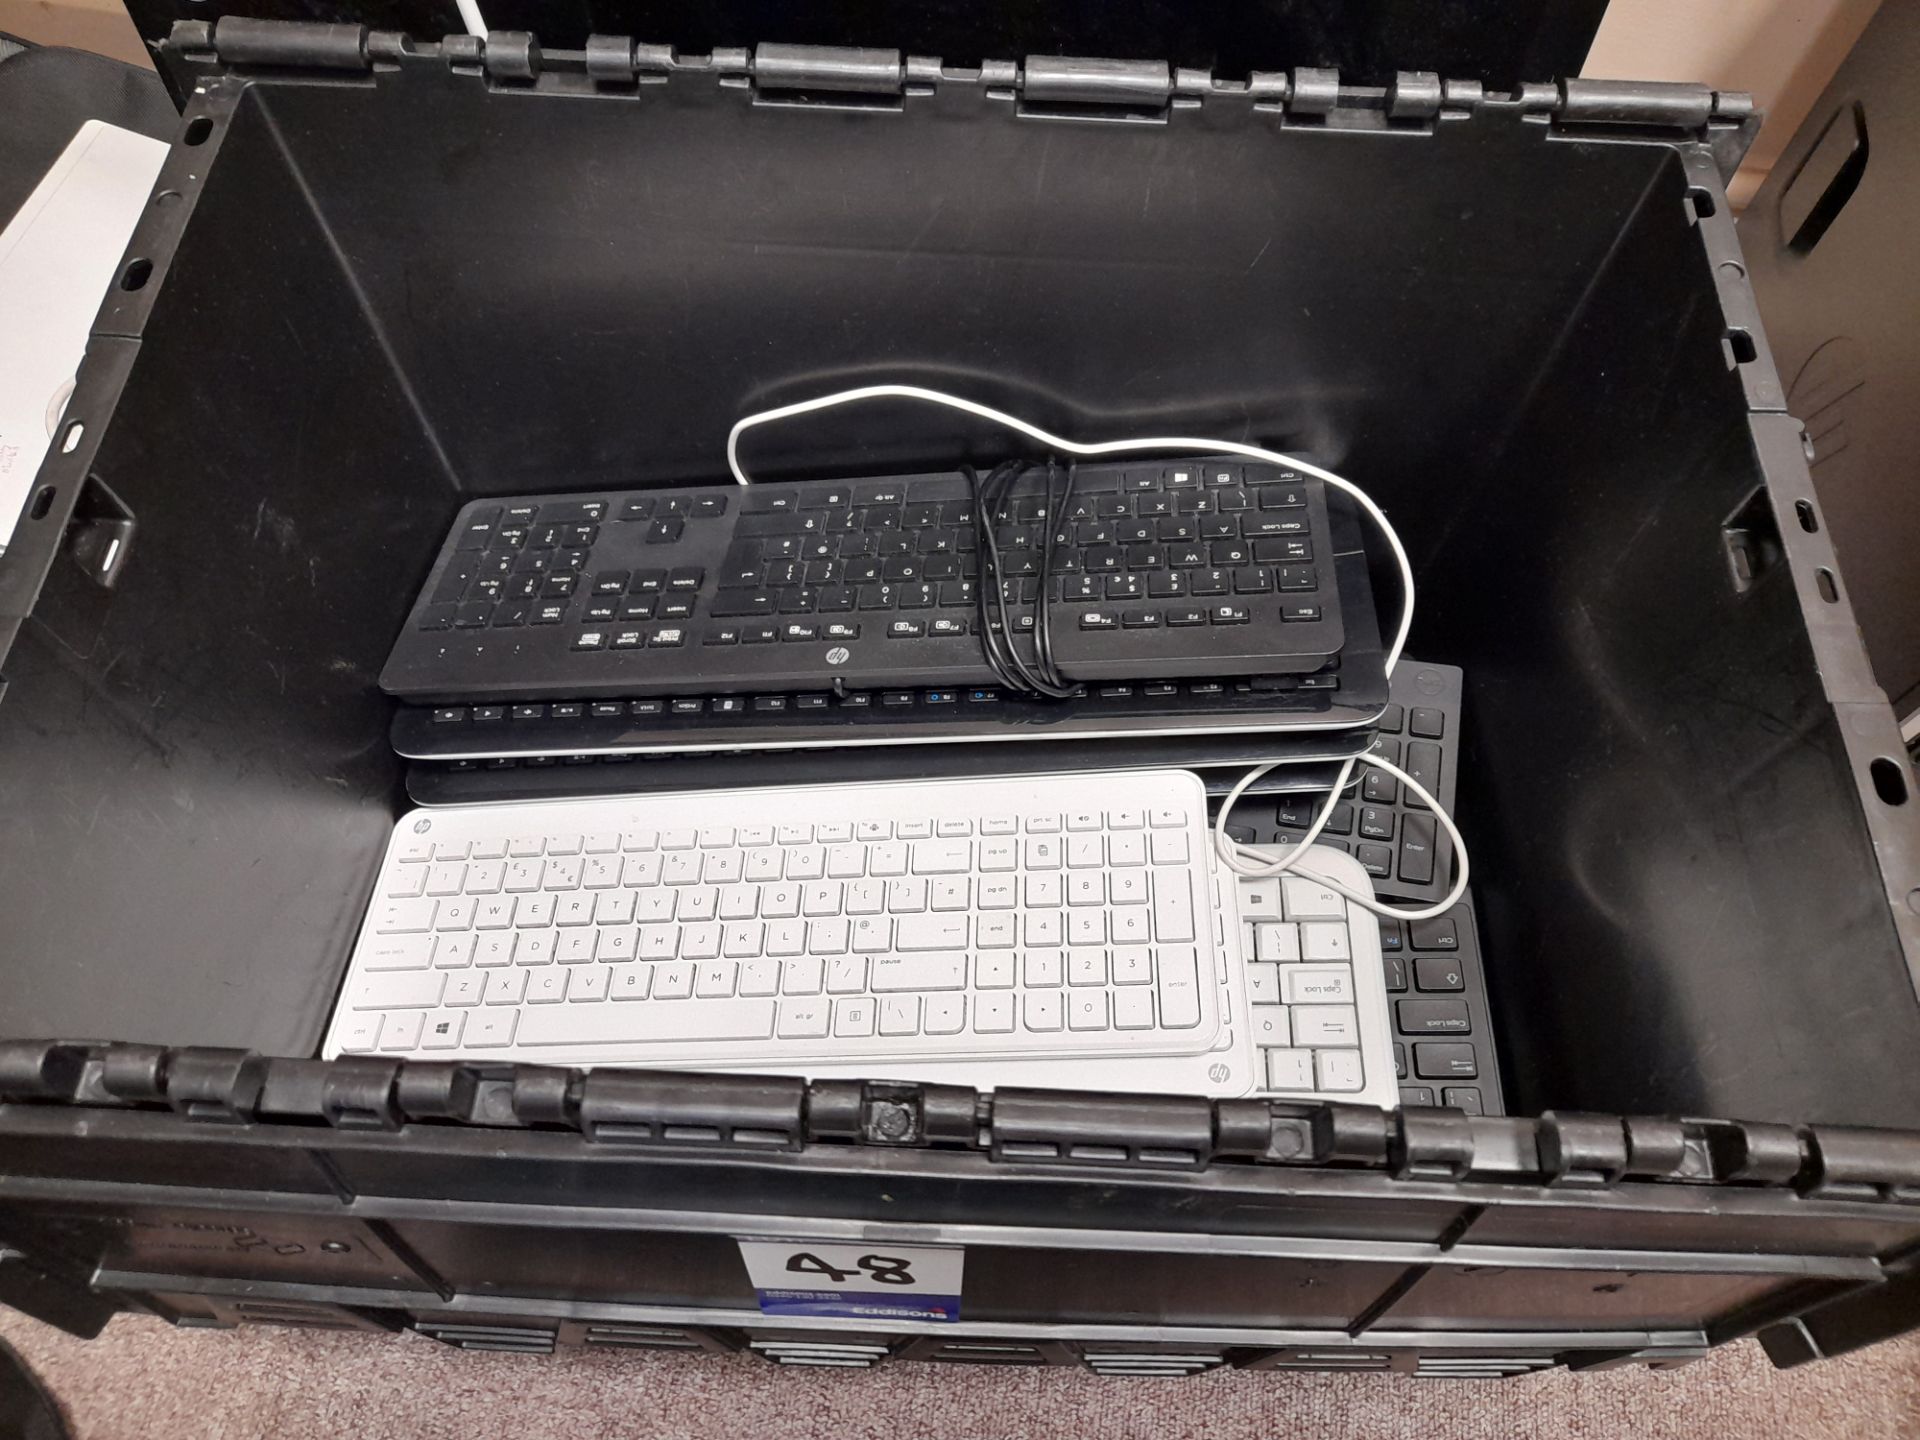 12 x Various PC keyboards, to plastic crate